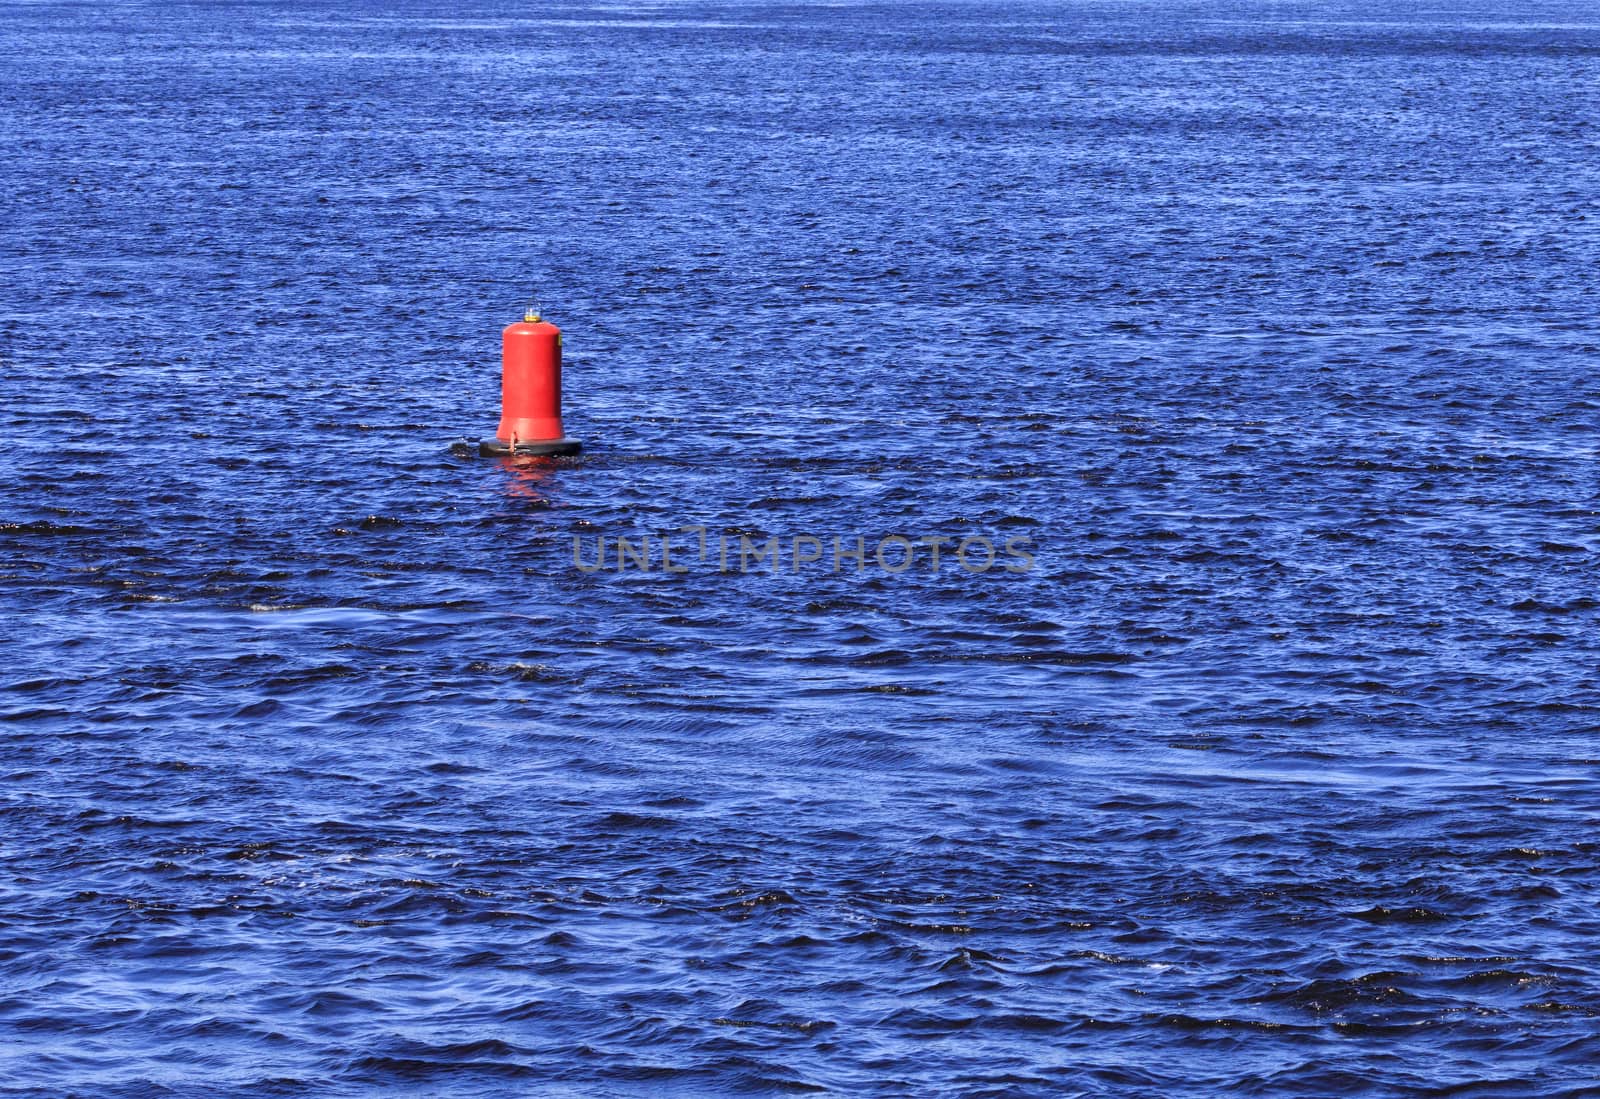 View of the blue waters of the river and the red buoy, which sways on the waves.